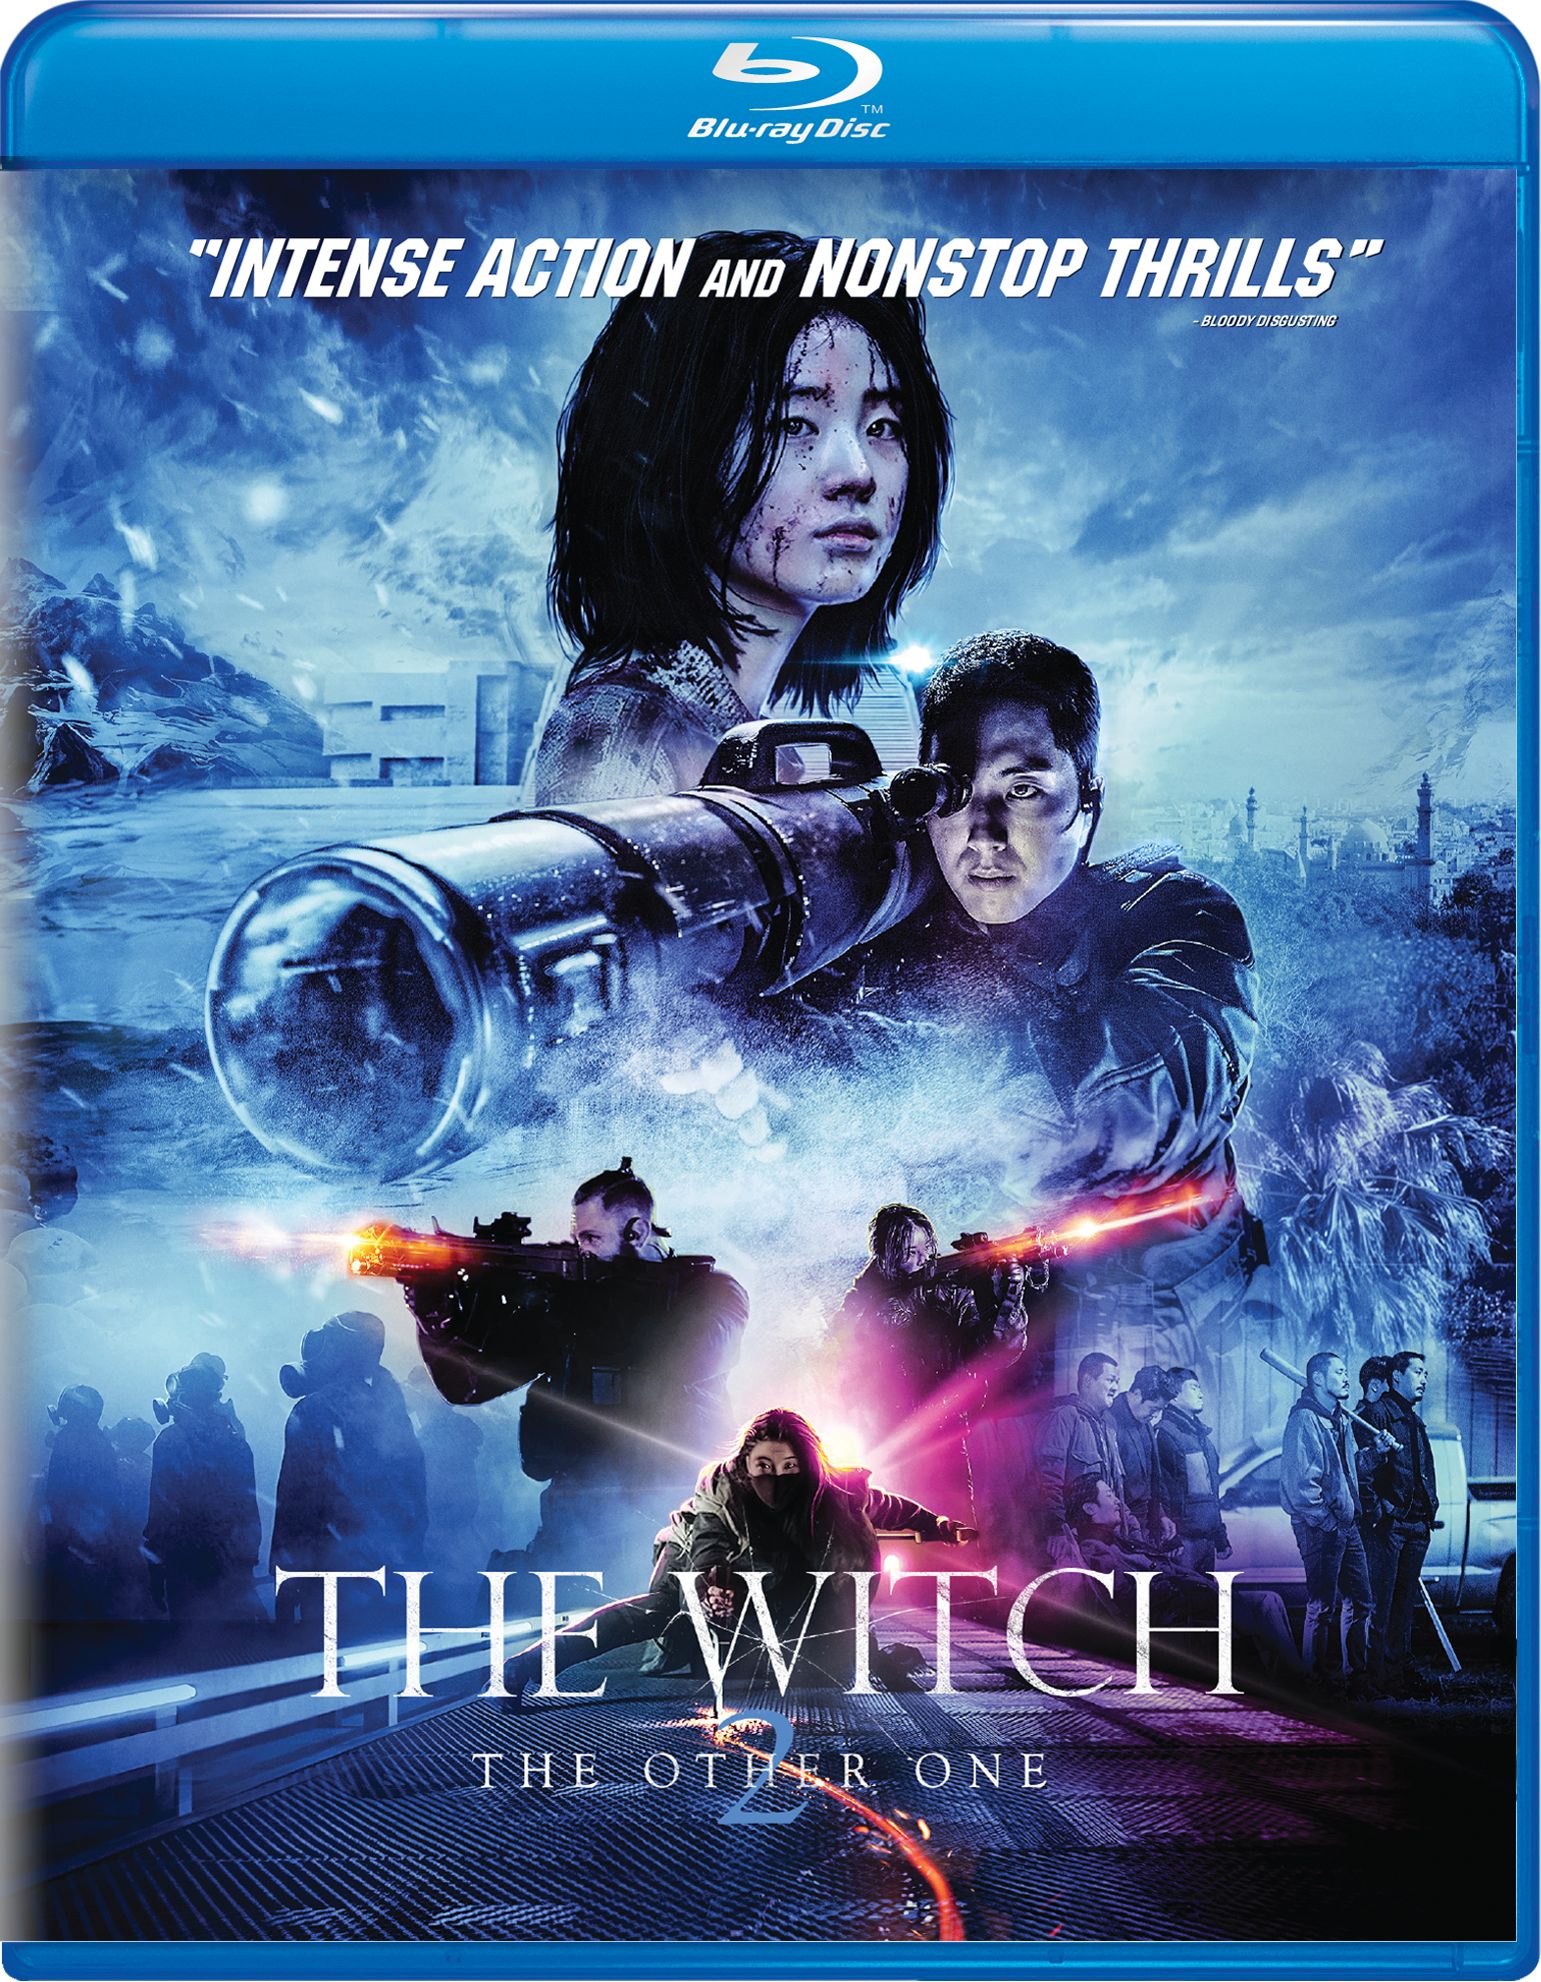 The Witch 2 - The Other One - Blu-ray [ 2022 ]  - Foreign Movies On Blu-ray - Movies On GRUV